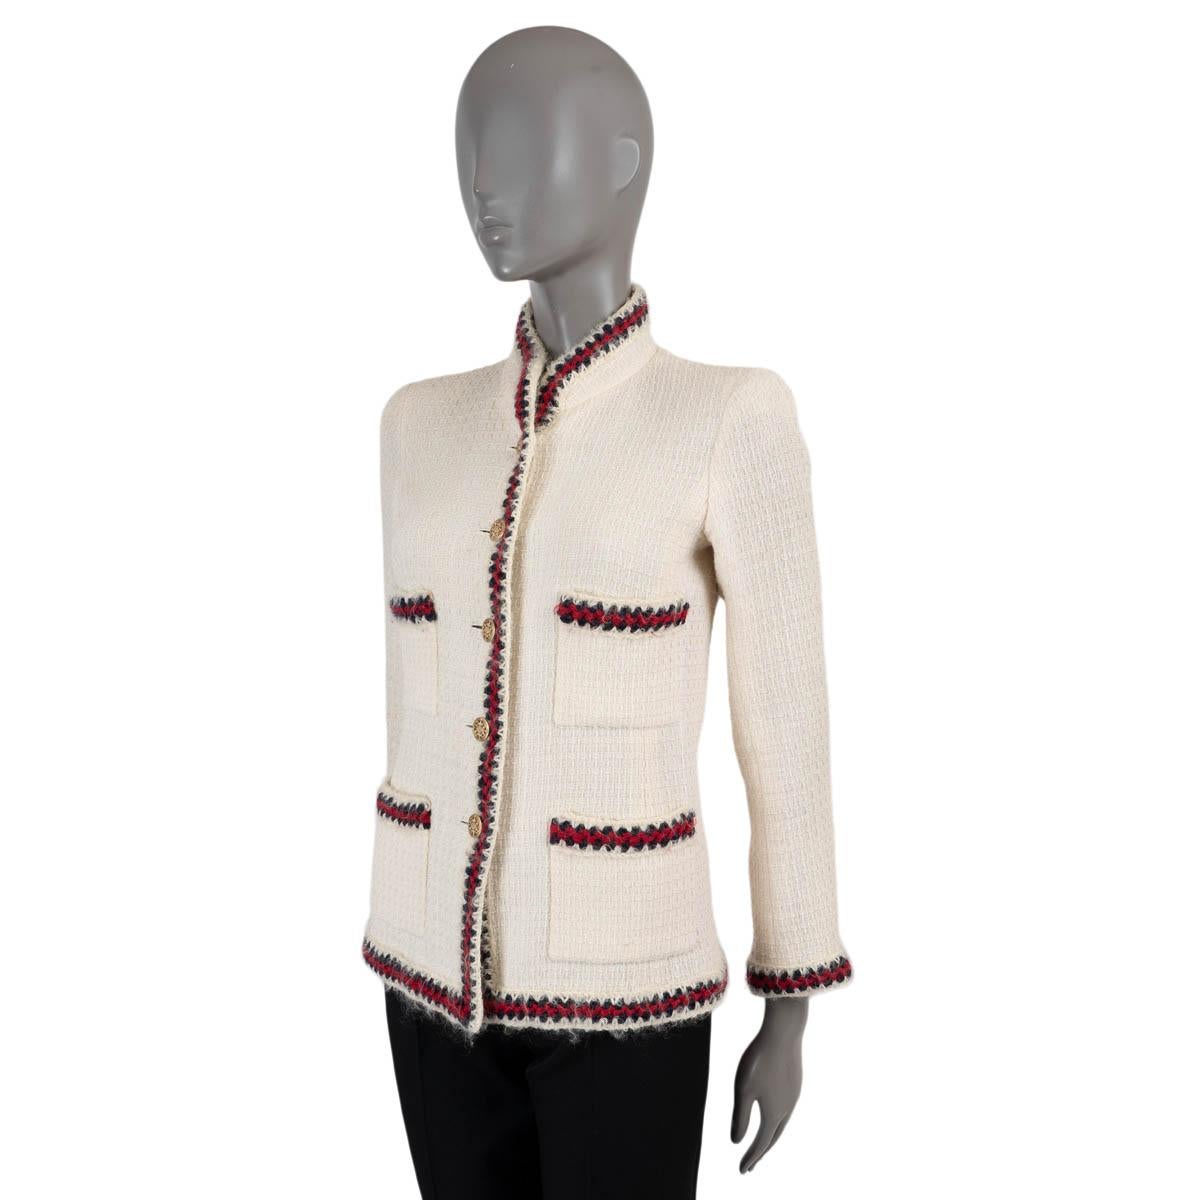 100% authentic Chanel tweed jacket in ecru wool (100%). Features red and dark blue crochet trim, standing collar and four pockets on the front. Closes with gold-tone buttons on the front and is lined in silk (with 14% elastane). Please note: The